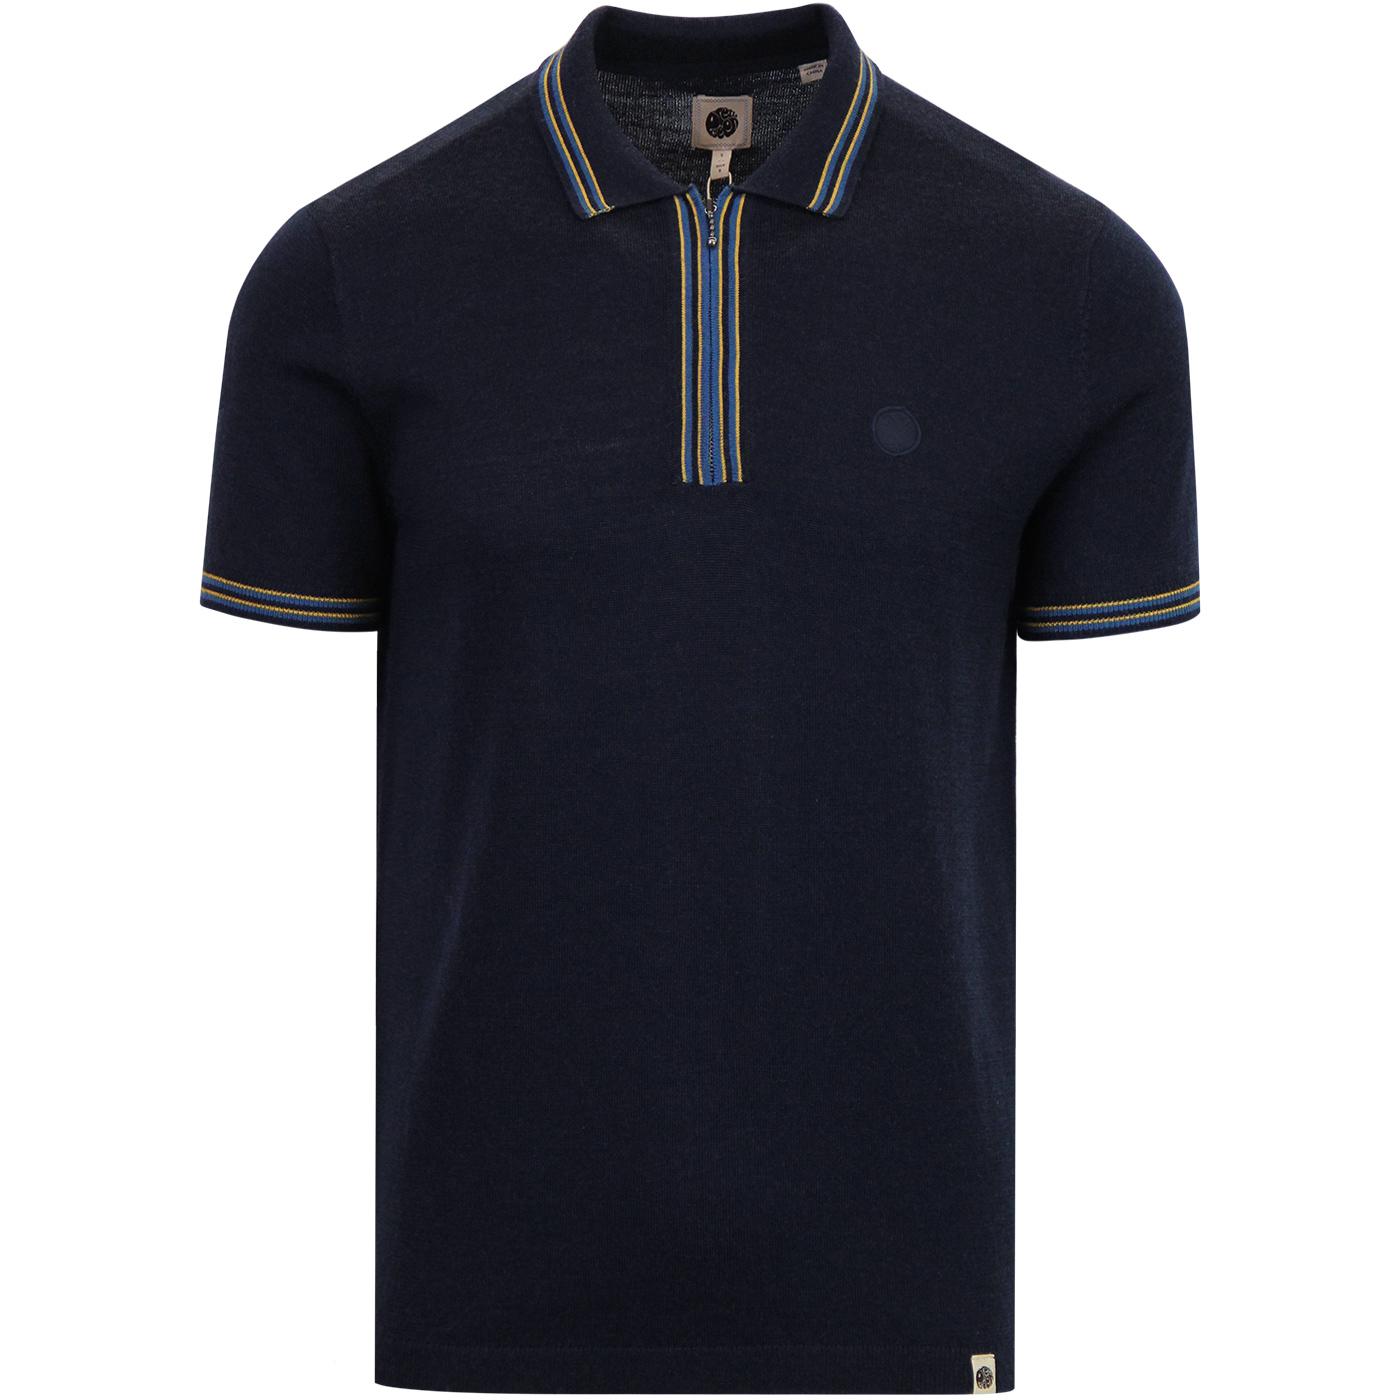 PRETTY GREEN Mod Zip Neck Tipped Knitted Polo in Navy